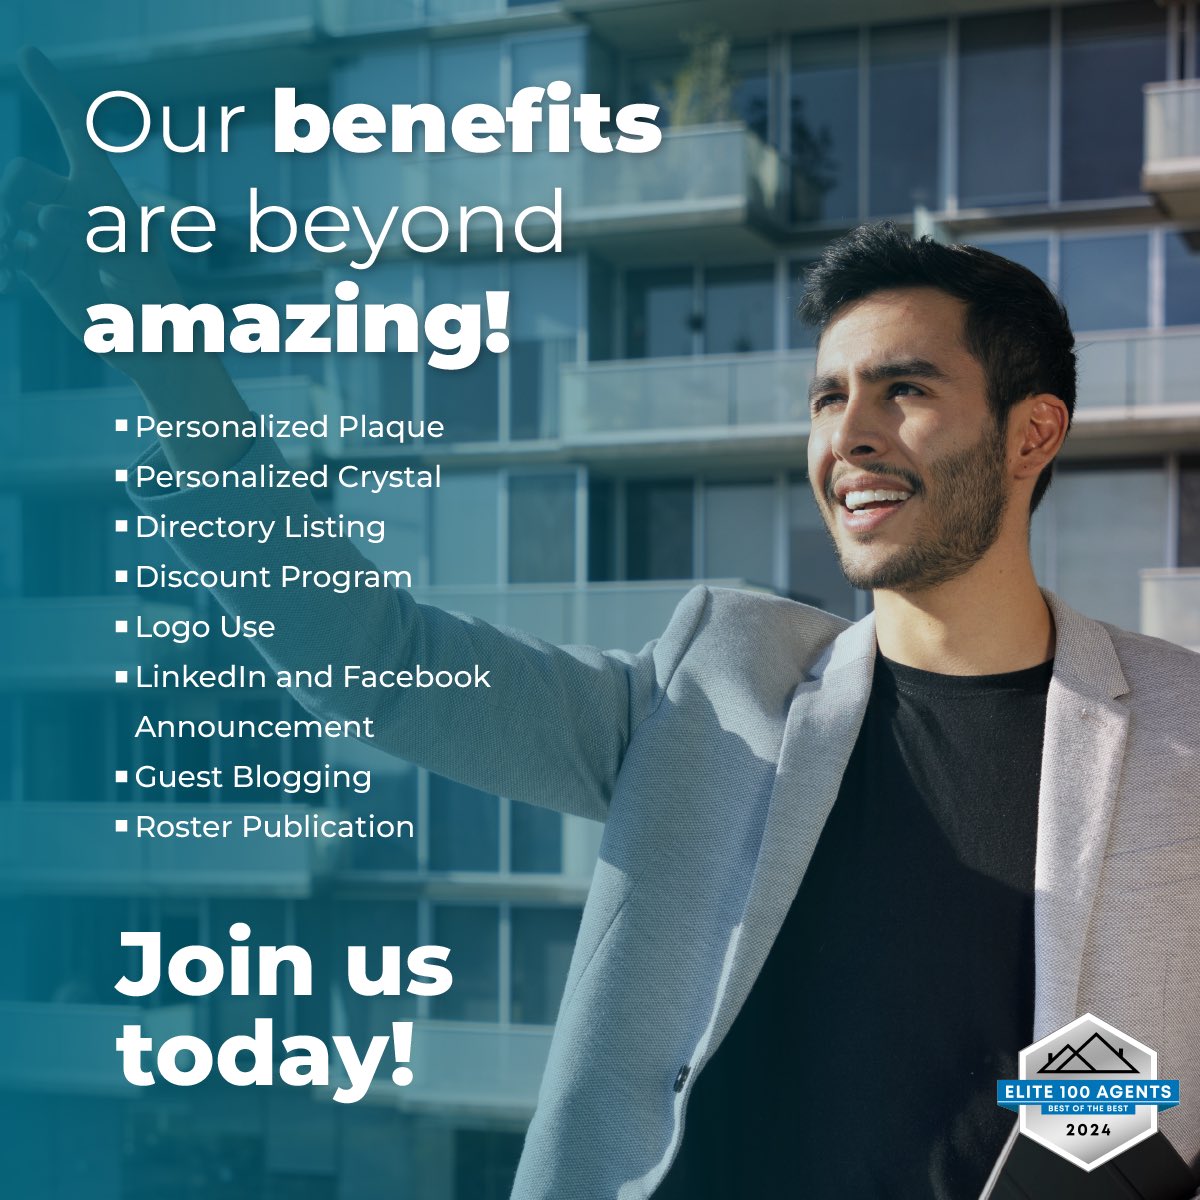 Visit: elite100agents.com/join/ and join us NOW to start enjoying these incredible benefits! 🙌 #realestate #realestateagent #luxuryrealestate #elite100agents #californiarealestate #newyorkrealestate #floridarealestate #miamirealestateagent